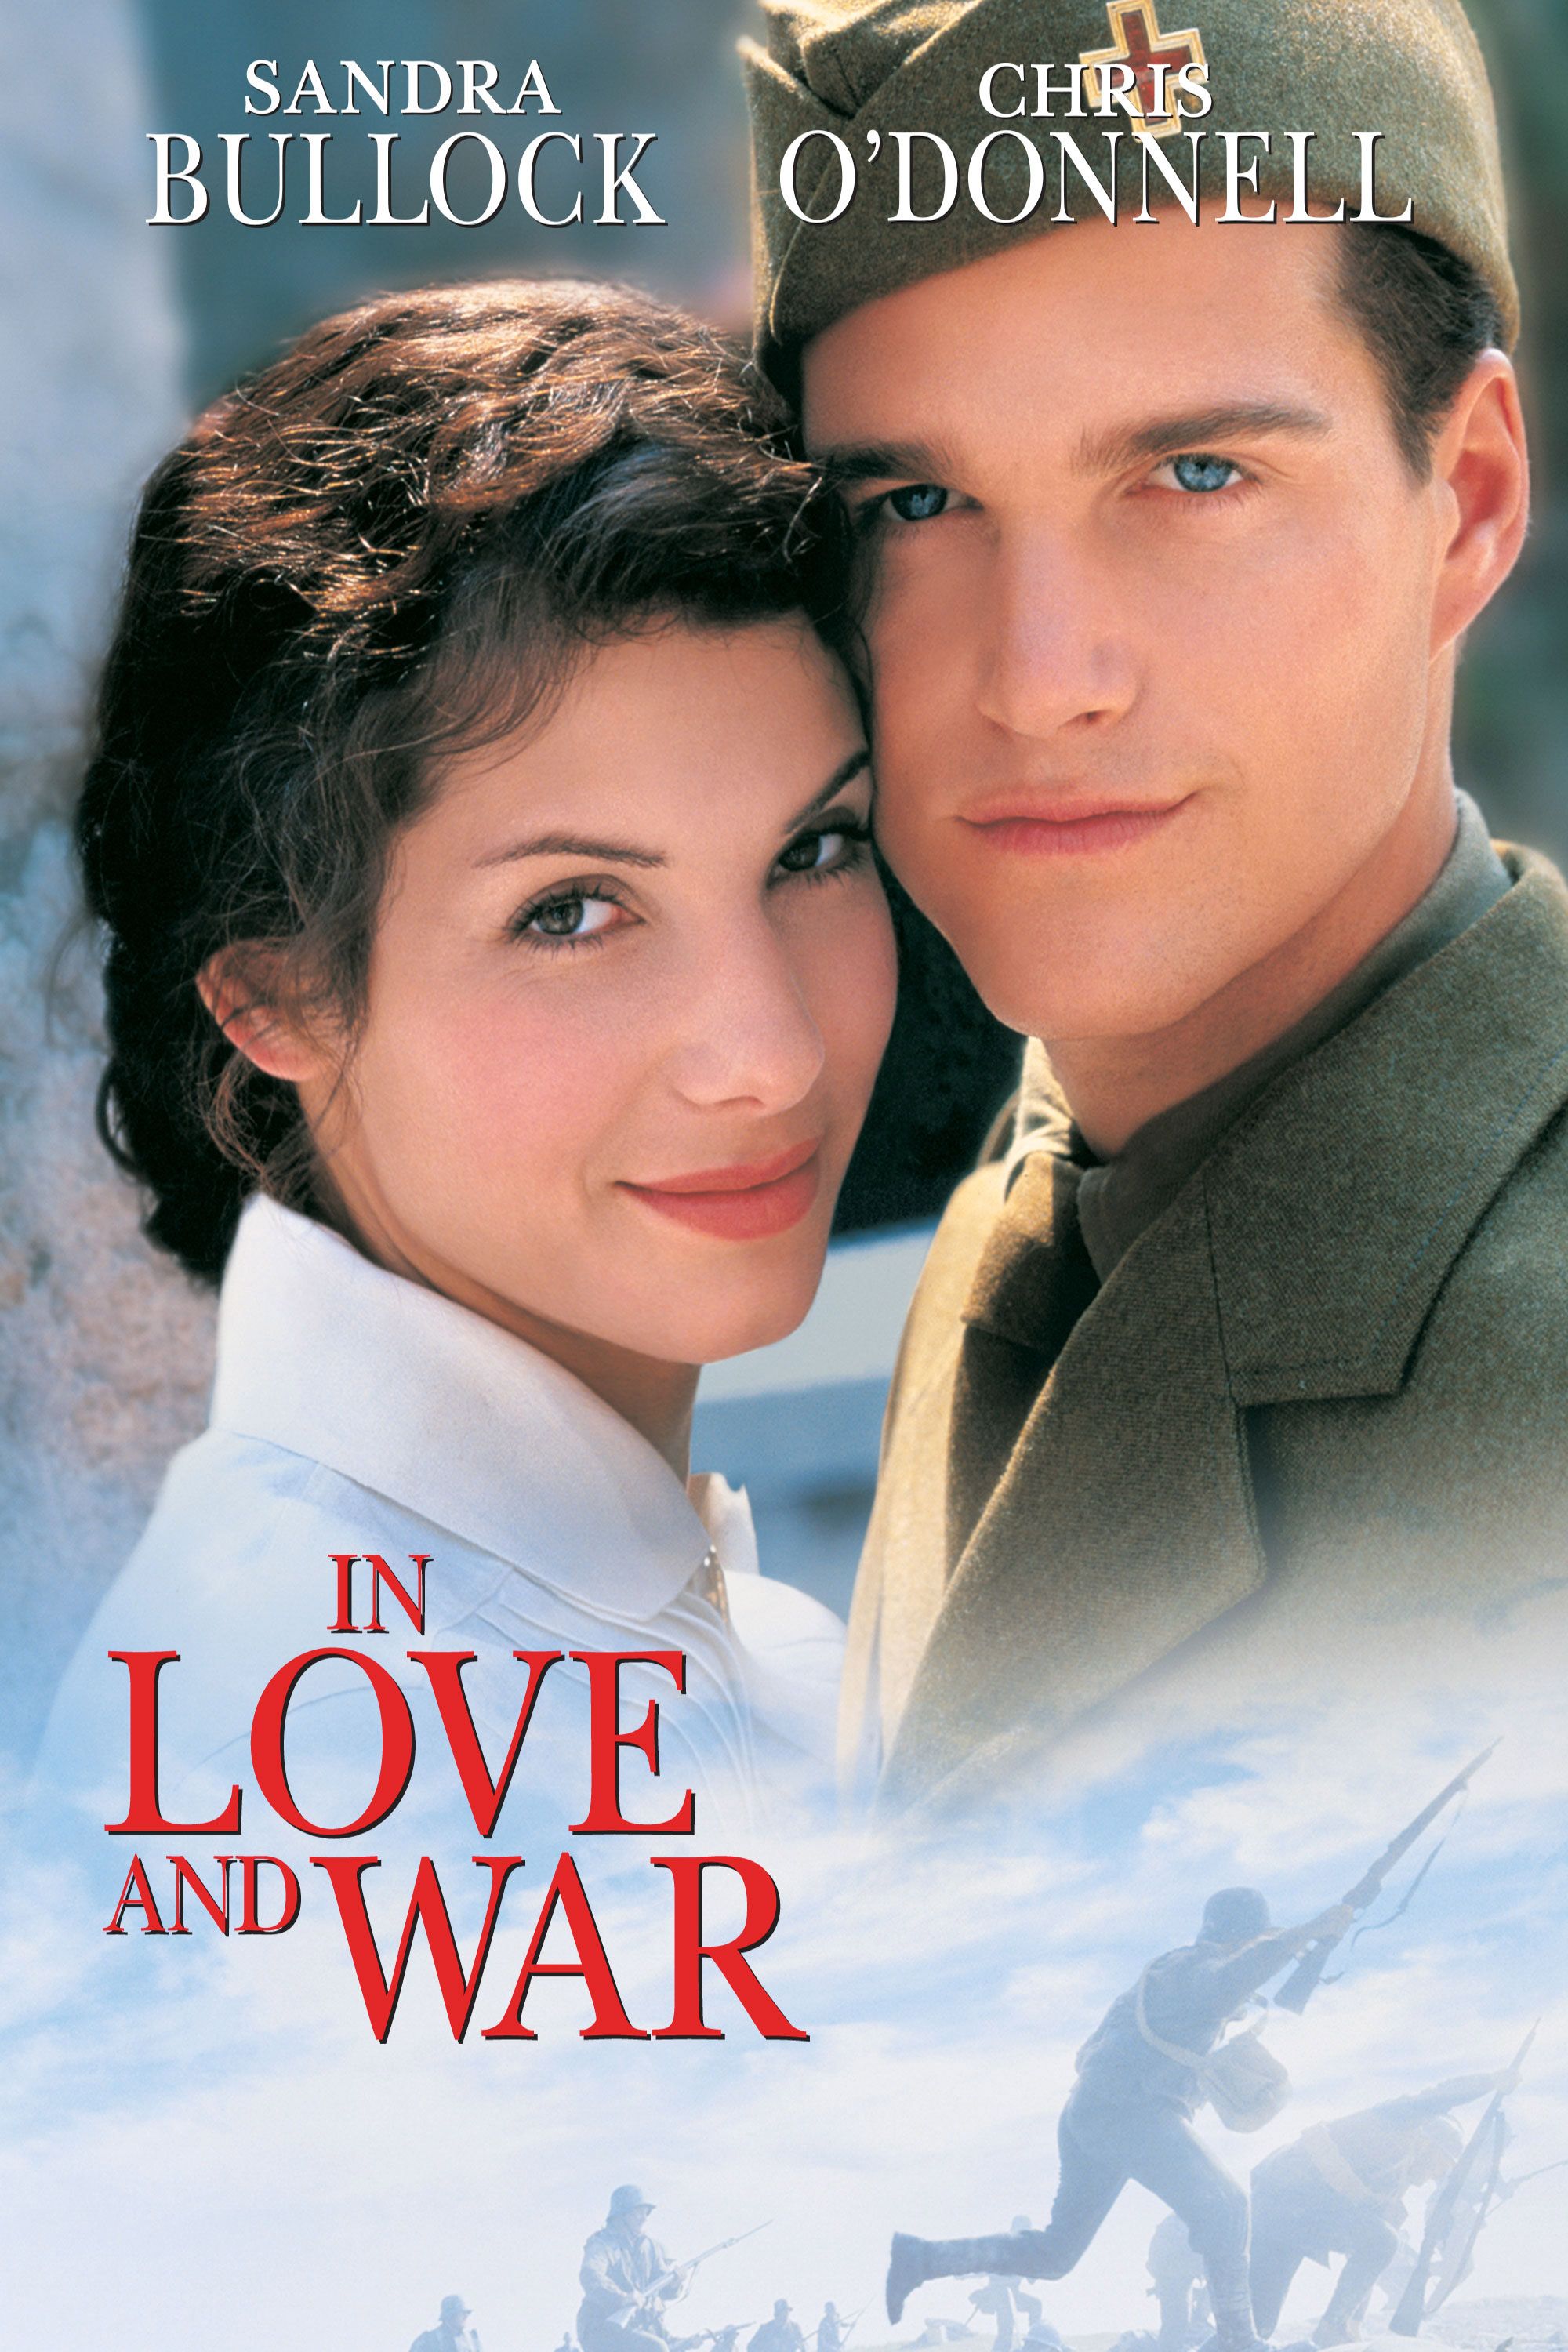 bruno medici recommends In Love And War Full Movie